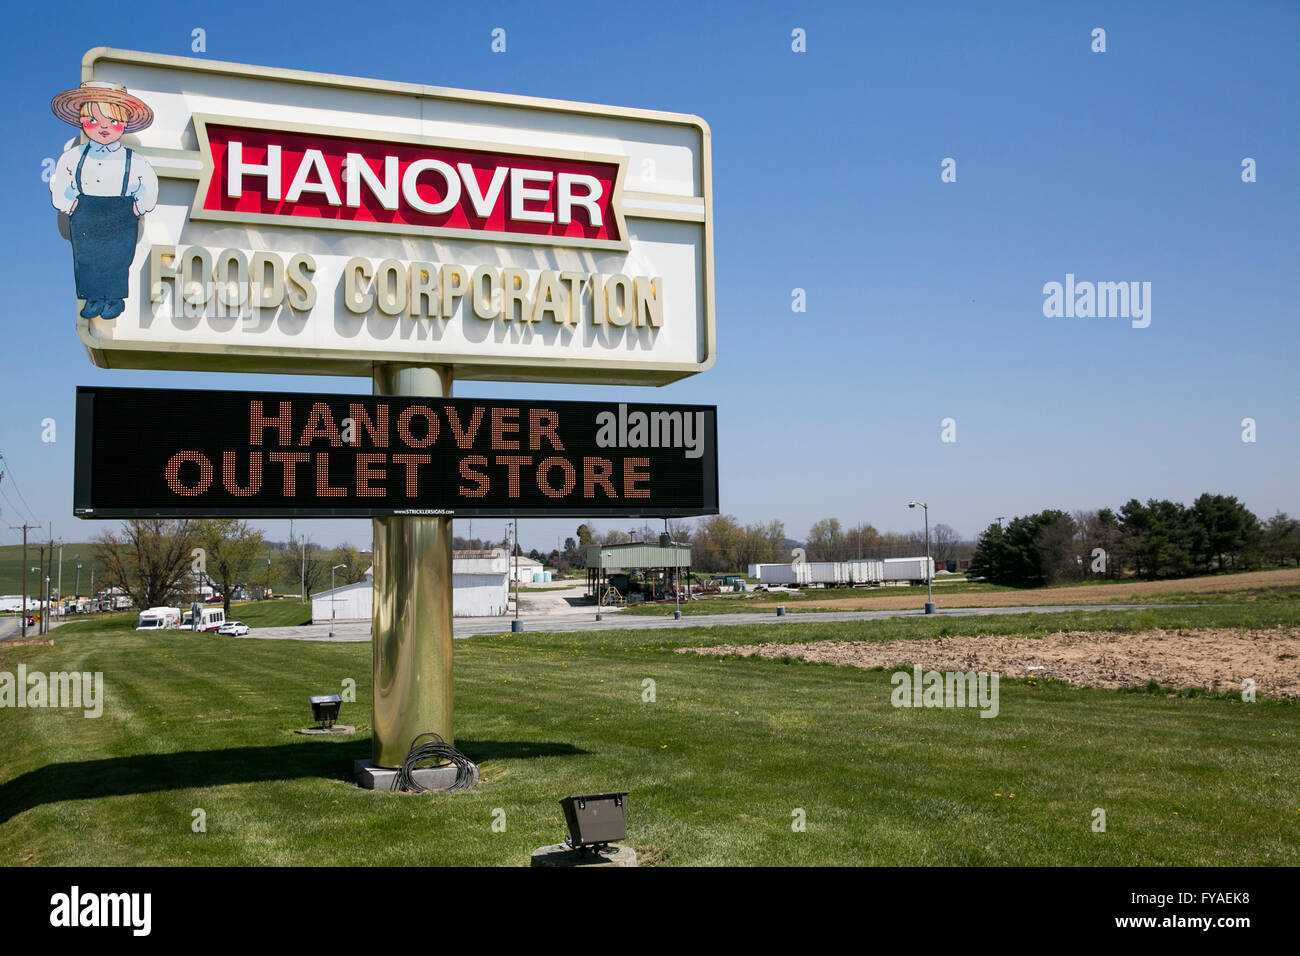 A logo sign outside of the headquarters of the Hanover Foods Corporation in Hanover, Pennsylvania on April 17, 2016. Stock Photo